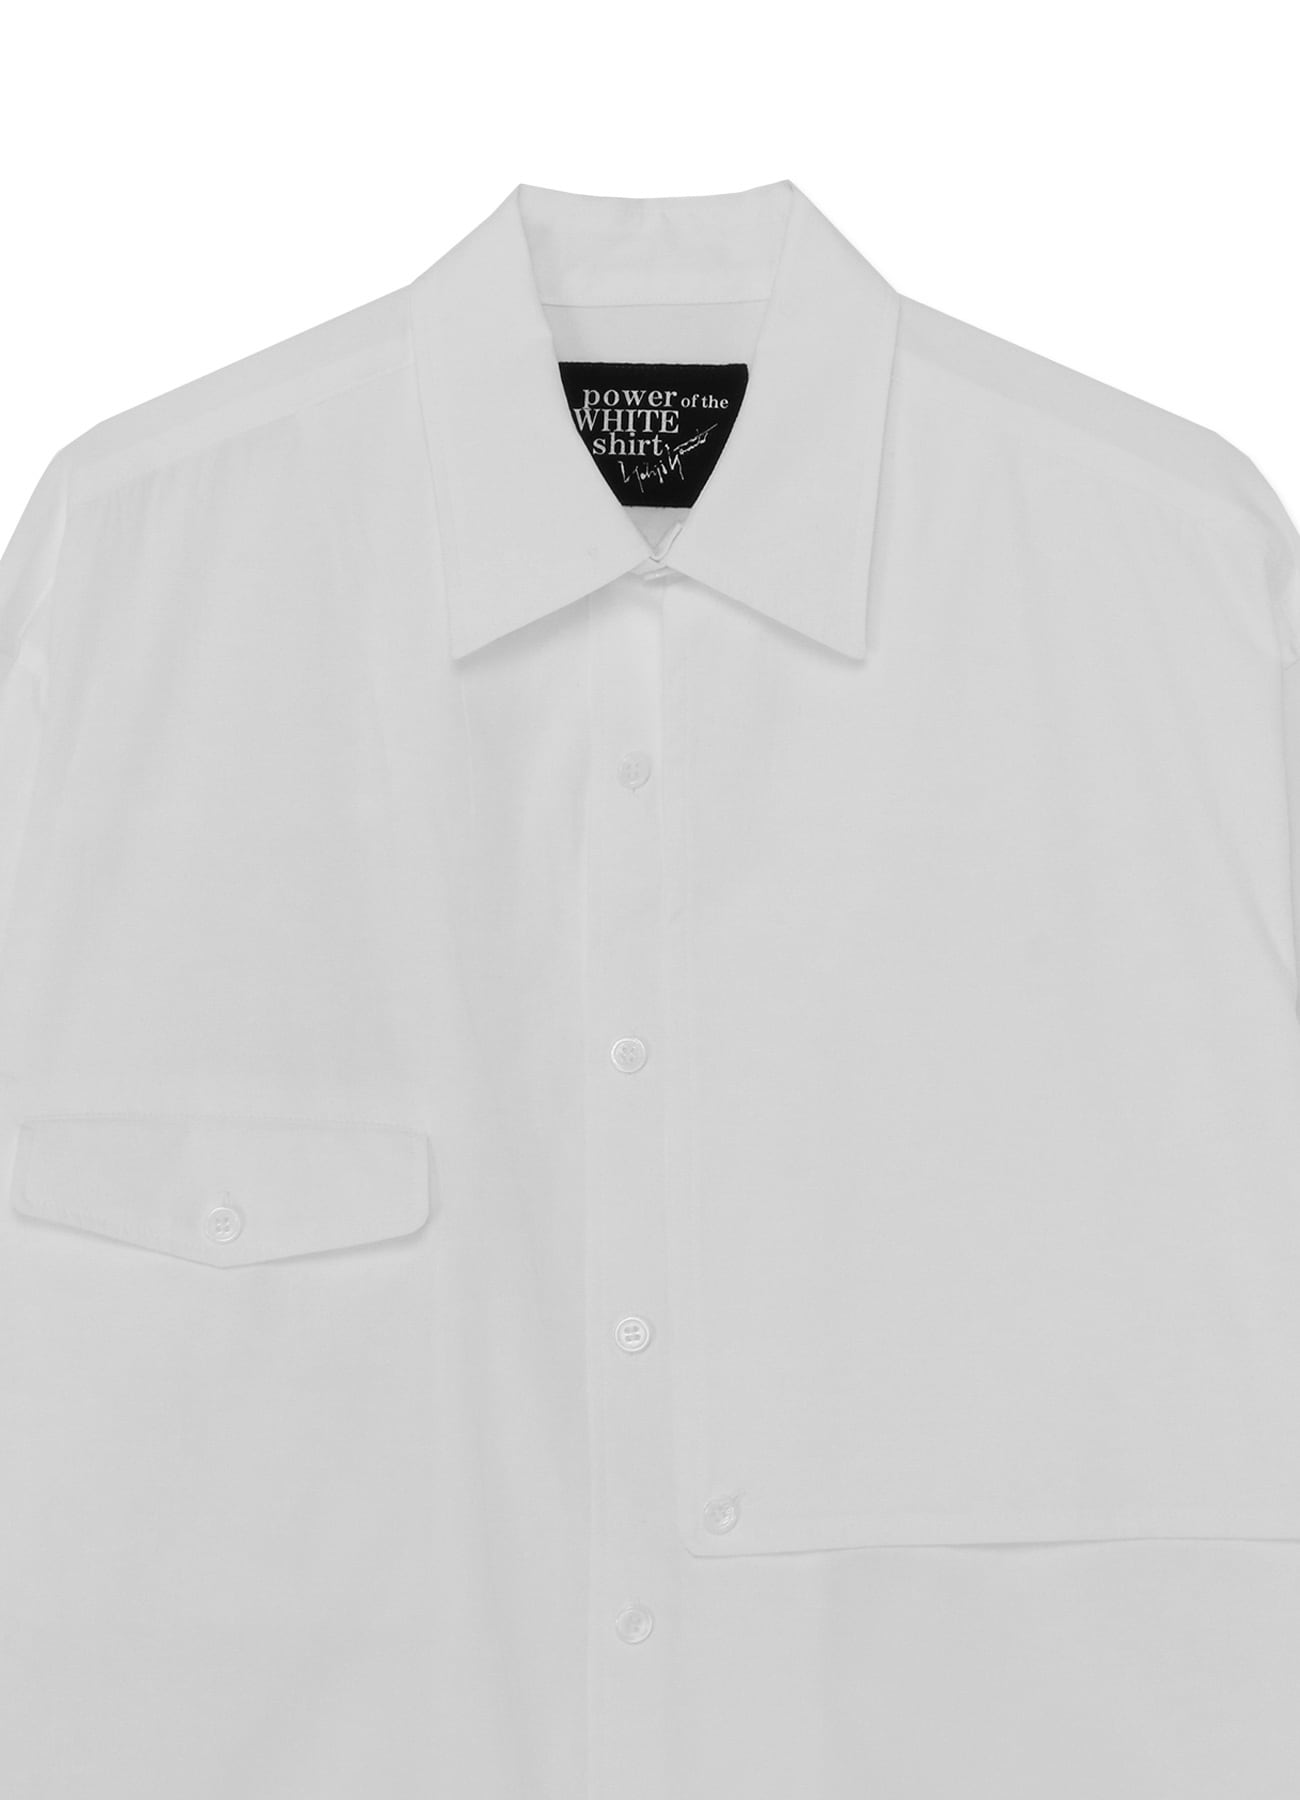 100/2 COTTON BROADCLOTH SHIRT WITH LEFT FLAP(S White): power of the ...